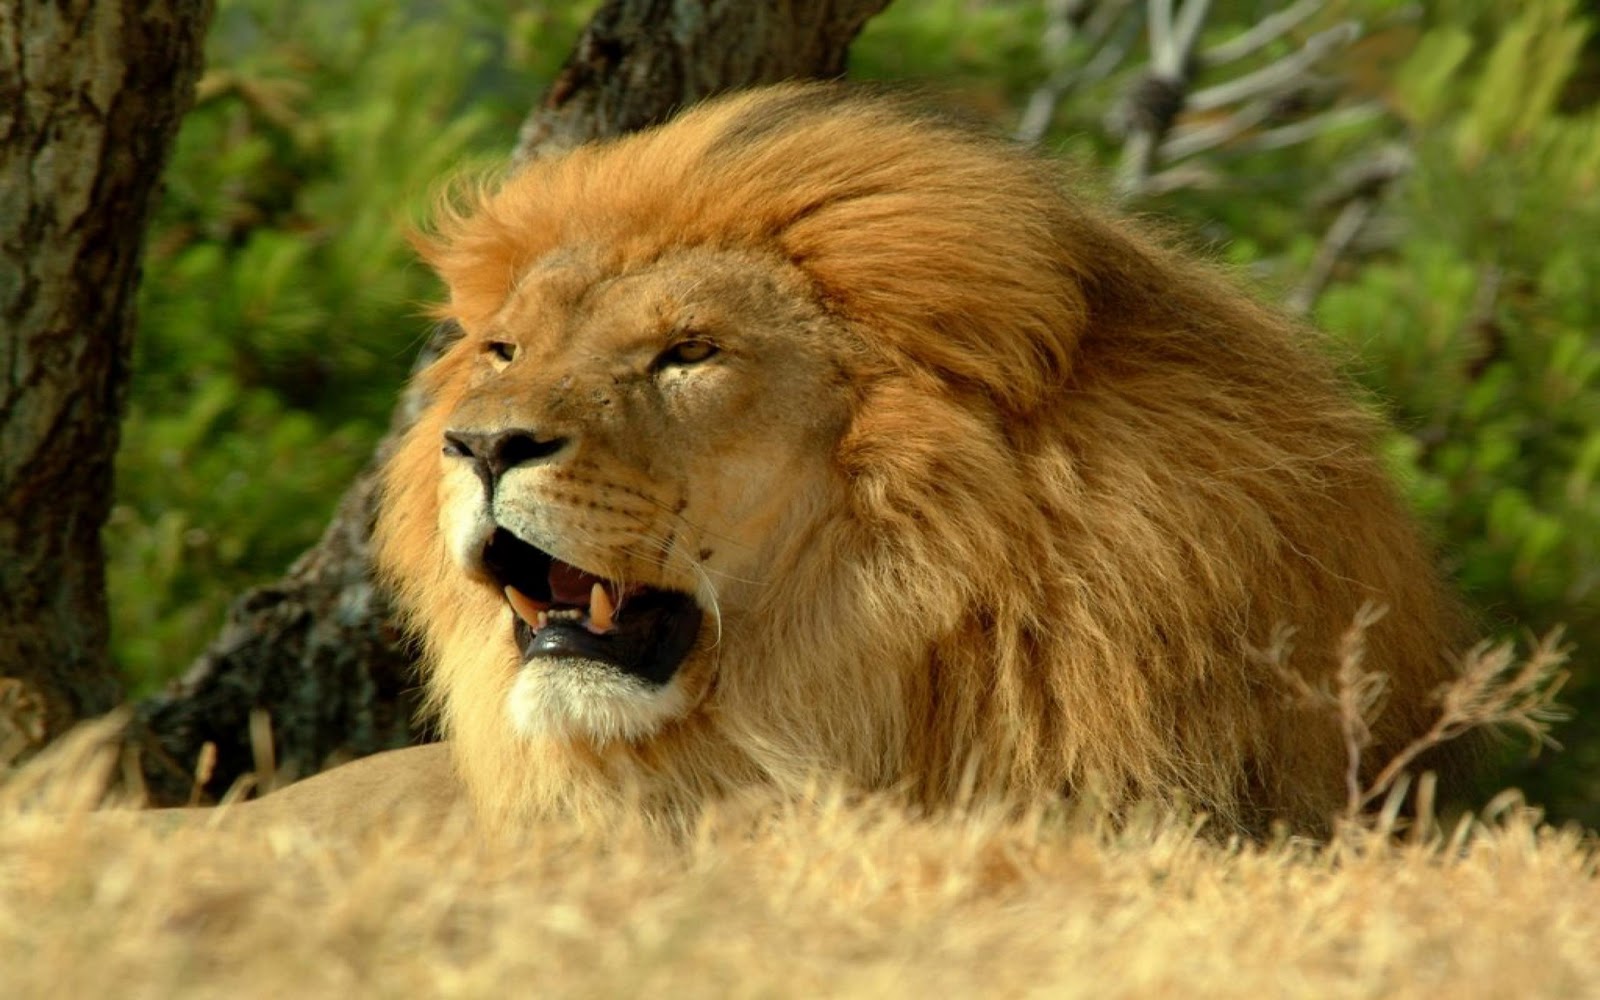 Image Wallpaper Theme: 26 Beautiful & Amazing Lion (The King OF Forest) Wallpaper HD